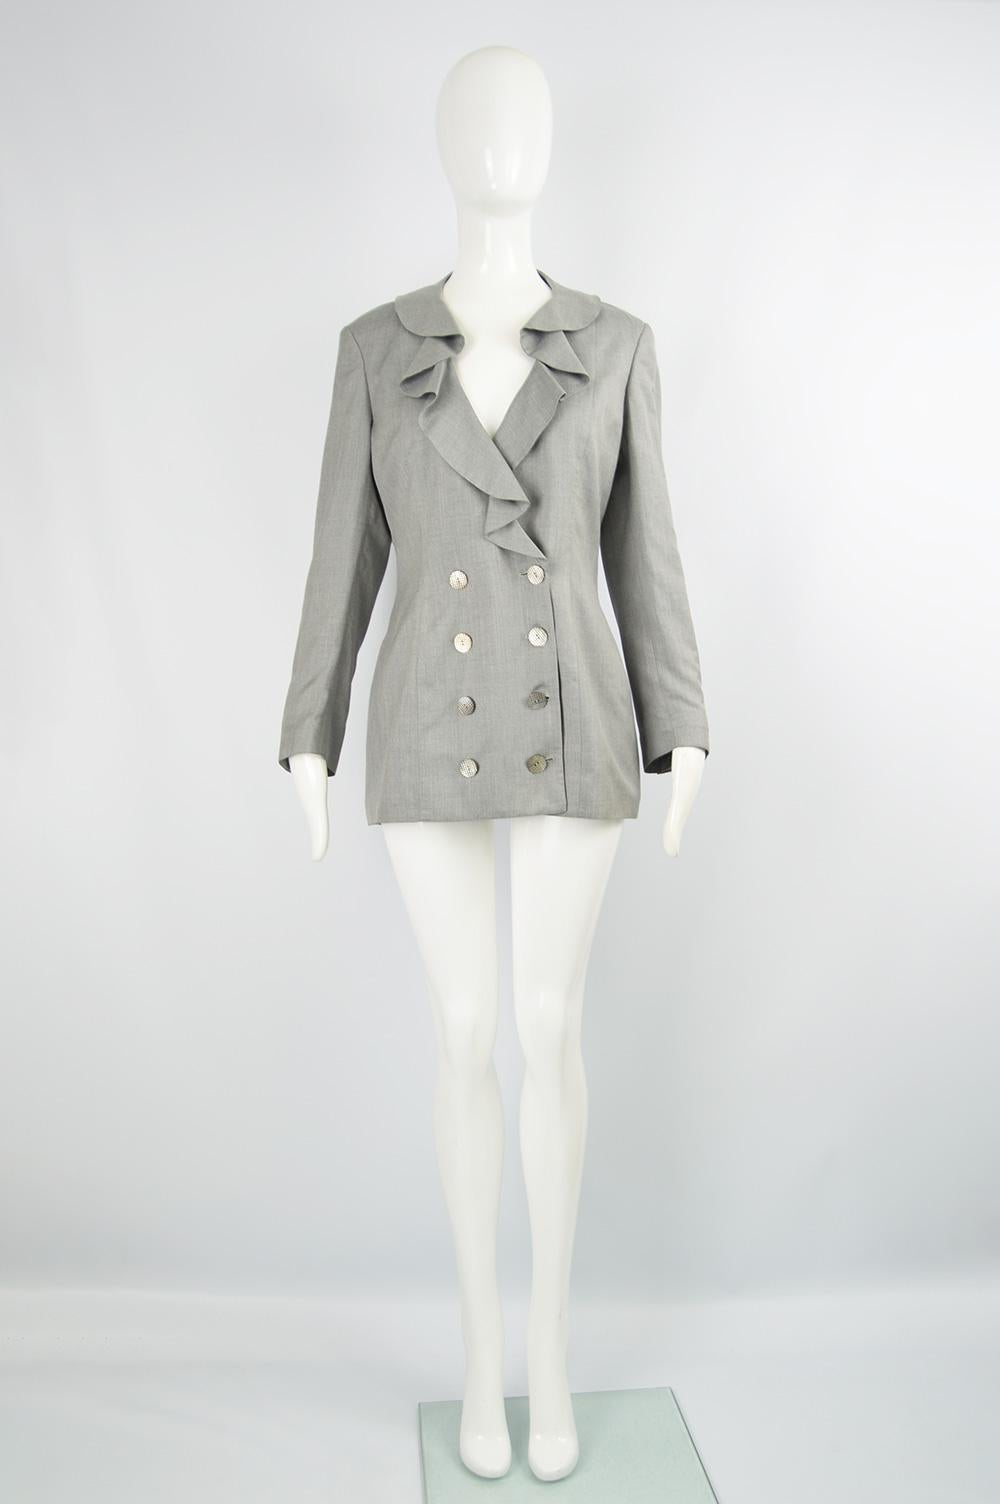 A chic vintage Valentino Boutique jacket from the 80s in a luxuriously fine grey wool with ruffles at the front and a silk lining - perfect for the office or as a sophisticated look in spring and summer. 

Size: Marked UK 10 as it was sold to a UK